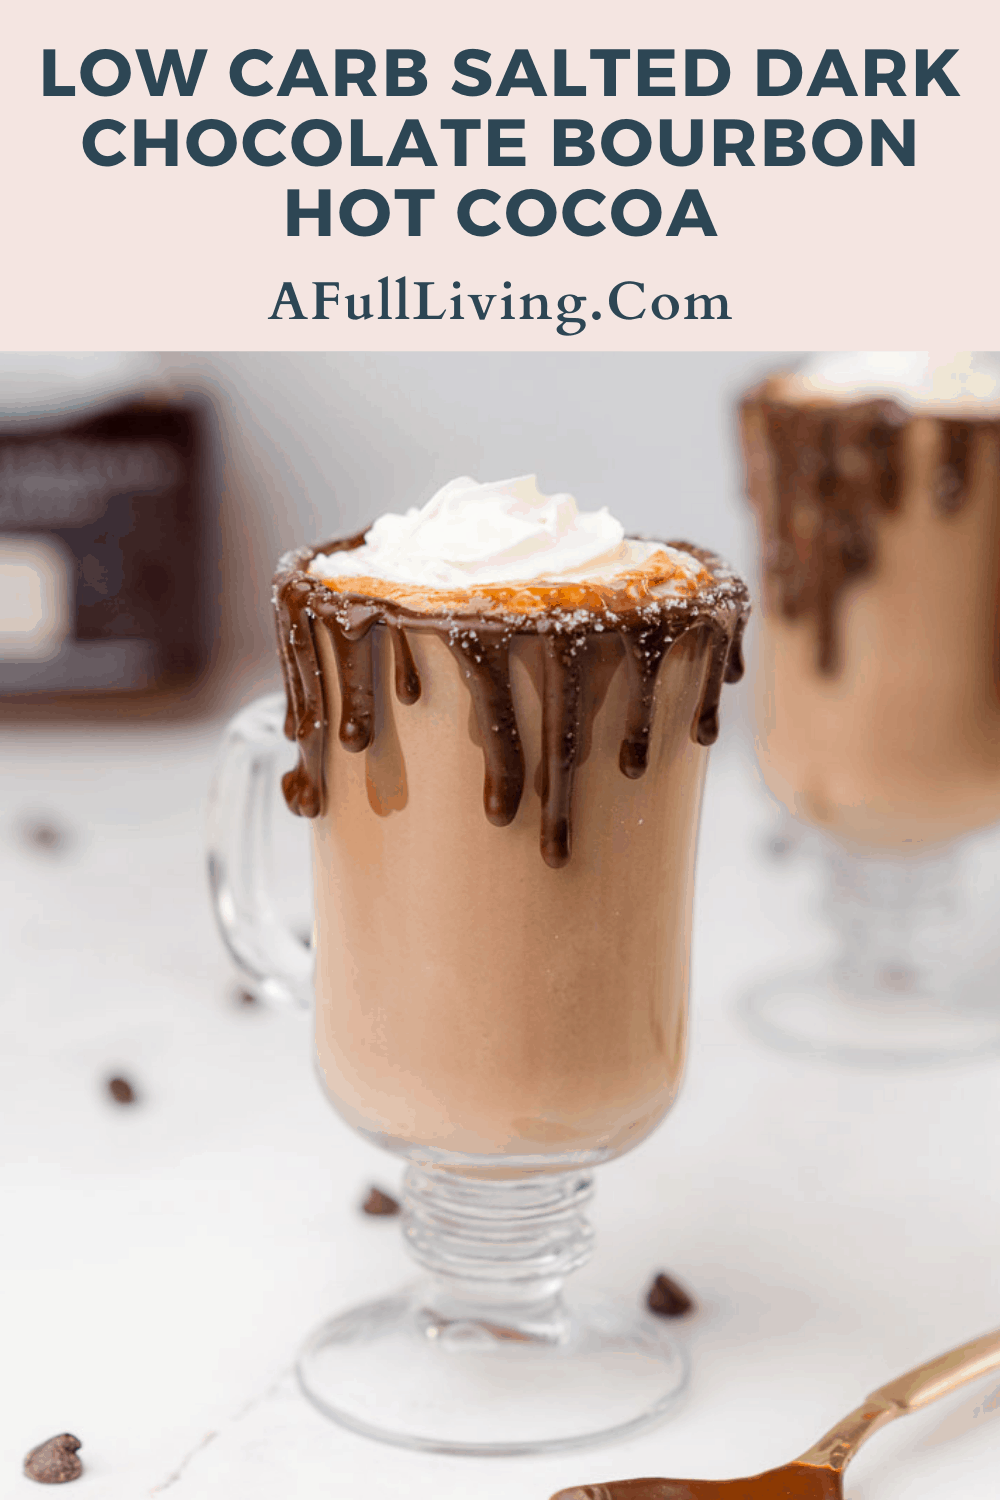 Graphic with text of Low Carb Salted Dark Chocolate Bourbon Hot Cocoa